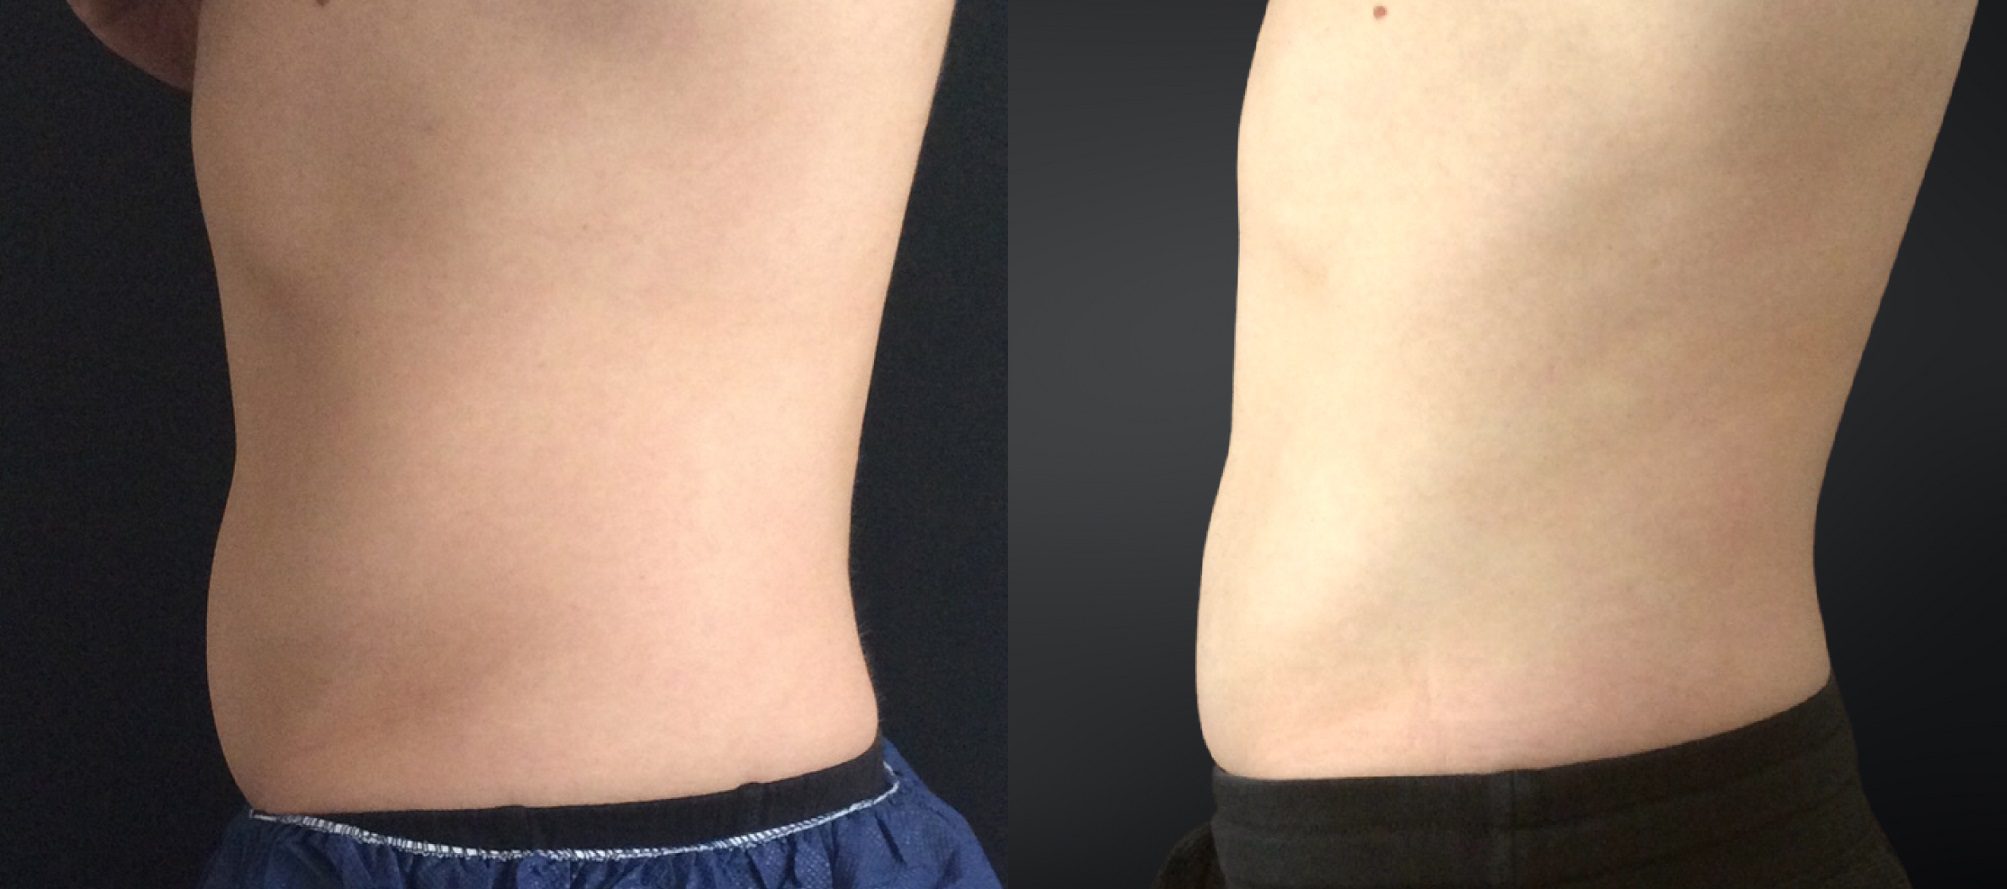 coolsculpting abdomen before and after